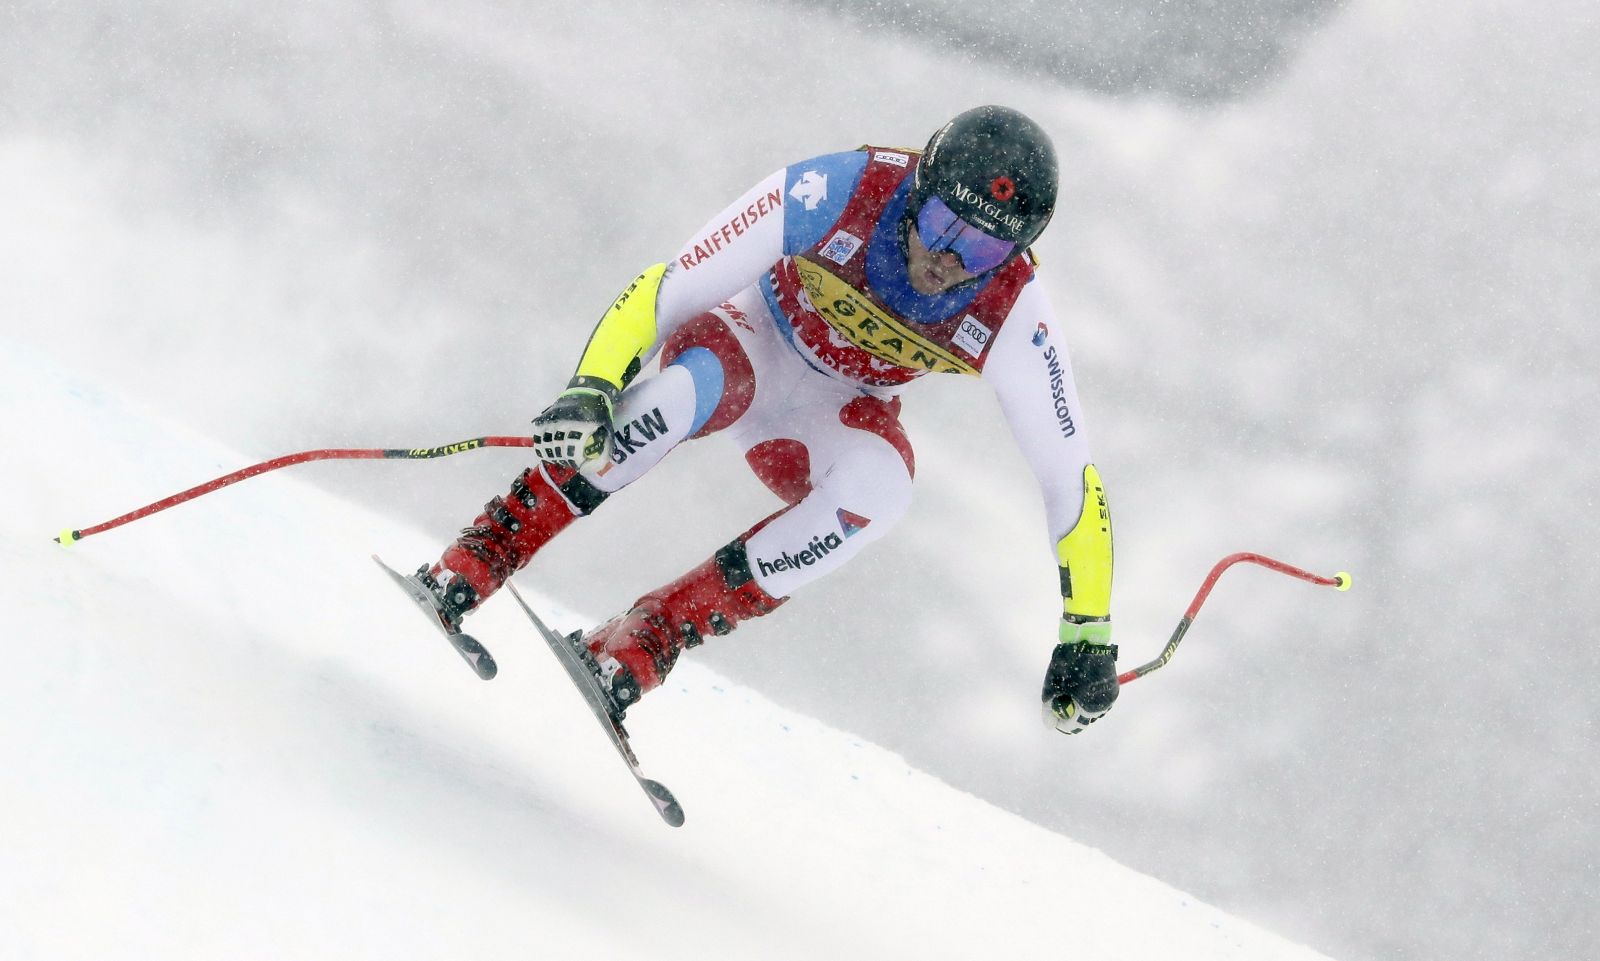 epa08878537 Mauro Caviezel of Switzerland in action during the Men's Super G race at the FIS Alpine Skiing World Cup in Val d'Isere, France, 12 December 2020.  EPA/GUILLAUME HORCAJUELO